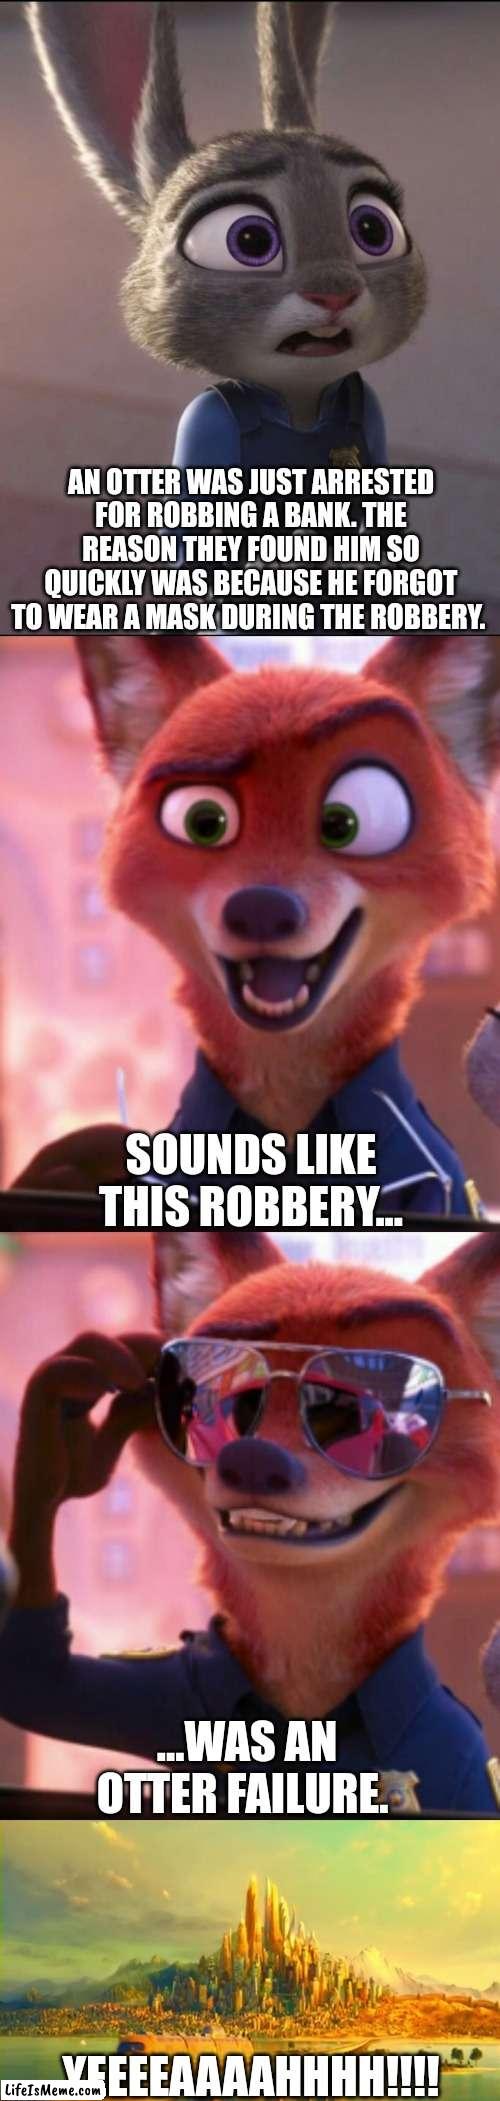 CSI: Zootopia 37 |  AN OTTER WAS JUST ARRESTED FOR ROBBING A BANK. THE REASON THEY FOUND HIM SO QUICKLY WAS BECAUSE HE FORGOT TO WEAR A MASK DURING THE ROBBERY. SOUNDS LIKE THIS ROBBERY... ...WAS AN OTTER FAILURE. YEEEEAAAAHHHH!!!! | image tagged in csi zootopia,zootopia,judy hopps,nick wilde,parody,funny | made w/ Lifeismeme meme maker